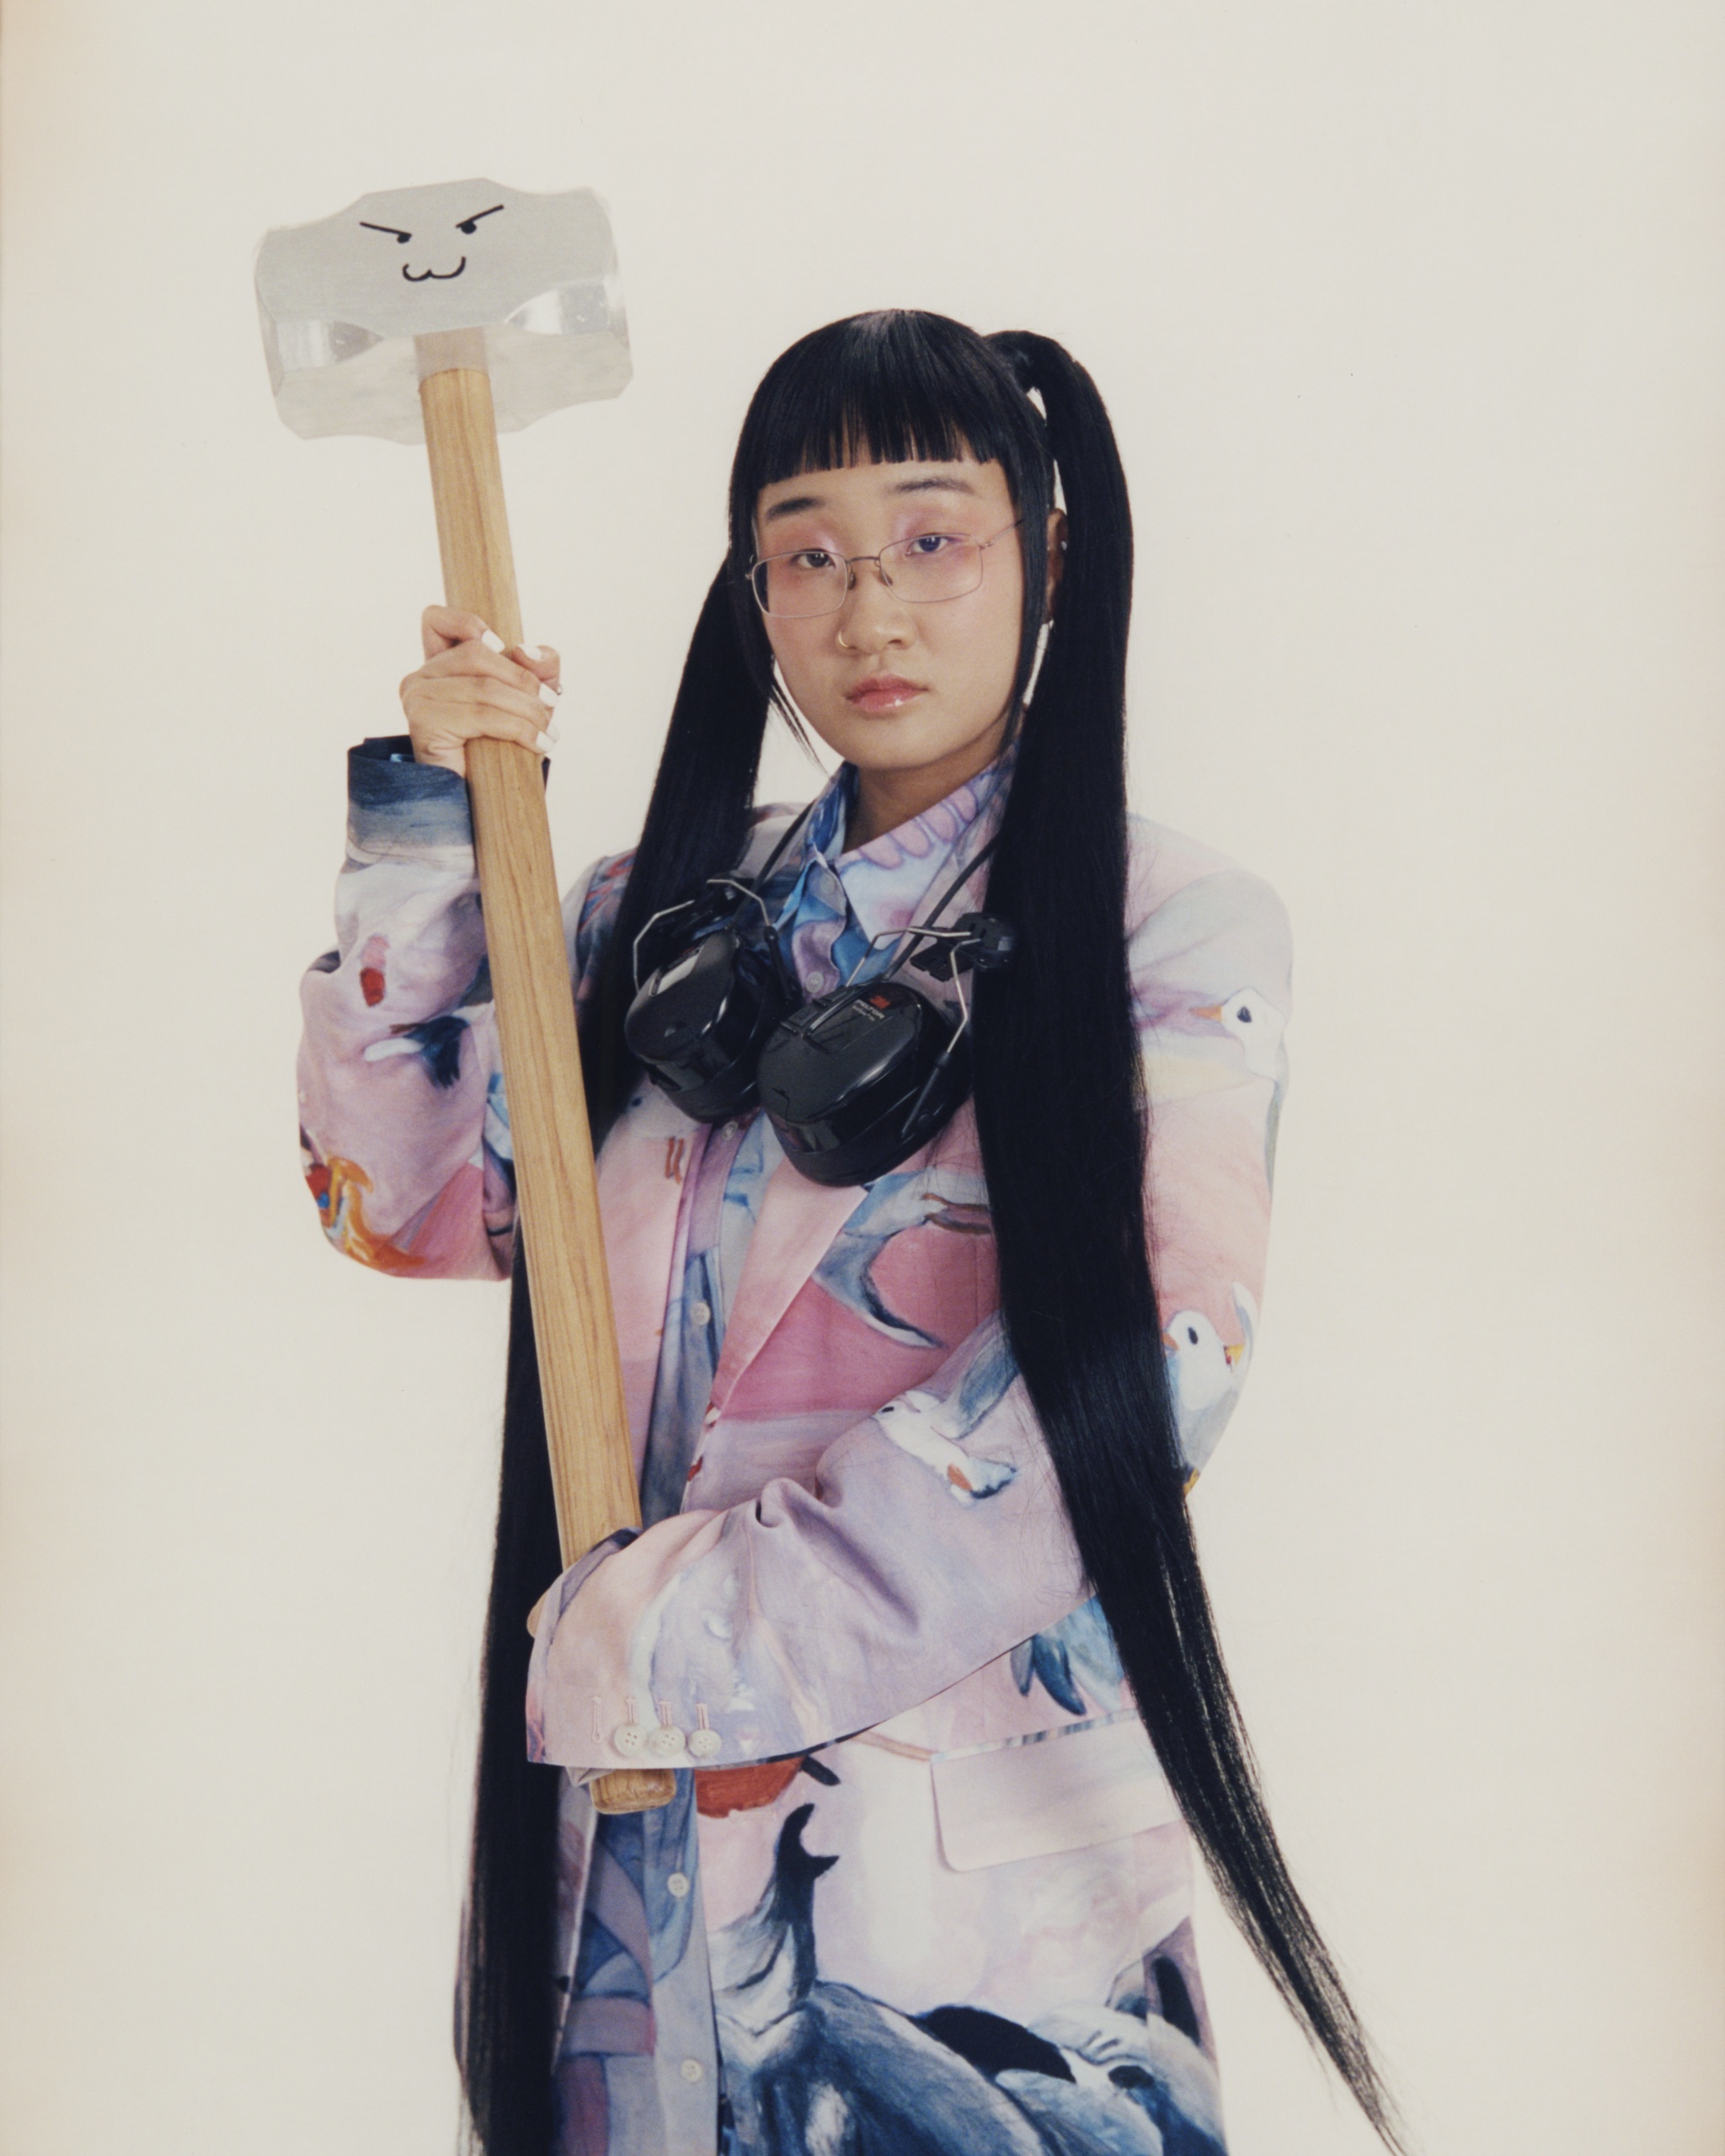 A Korean American woman with long, dark hair sweeping down beneath her hips holds up a large sledgehammer and looks directly at us. 